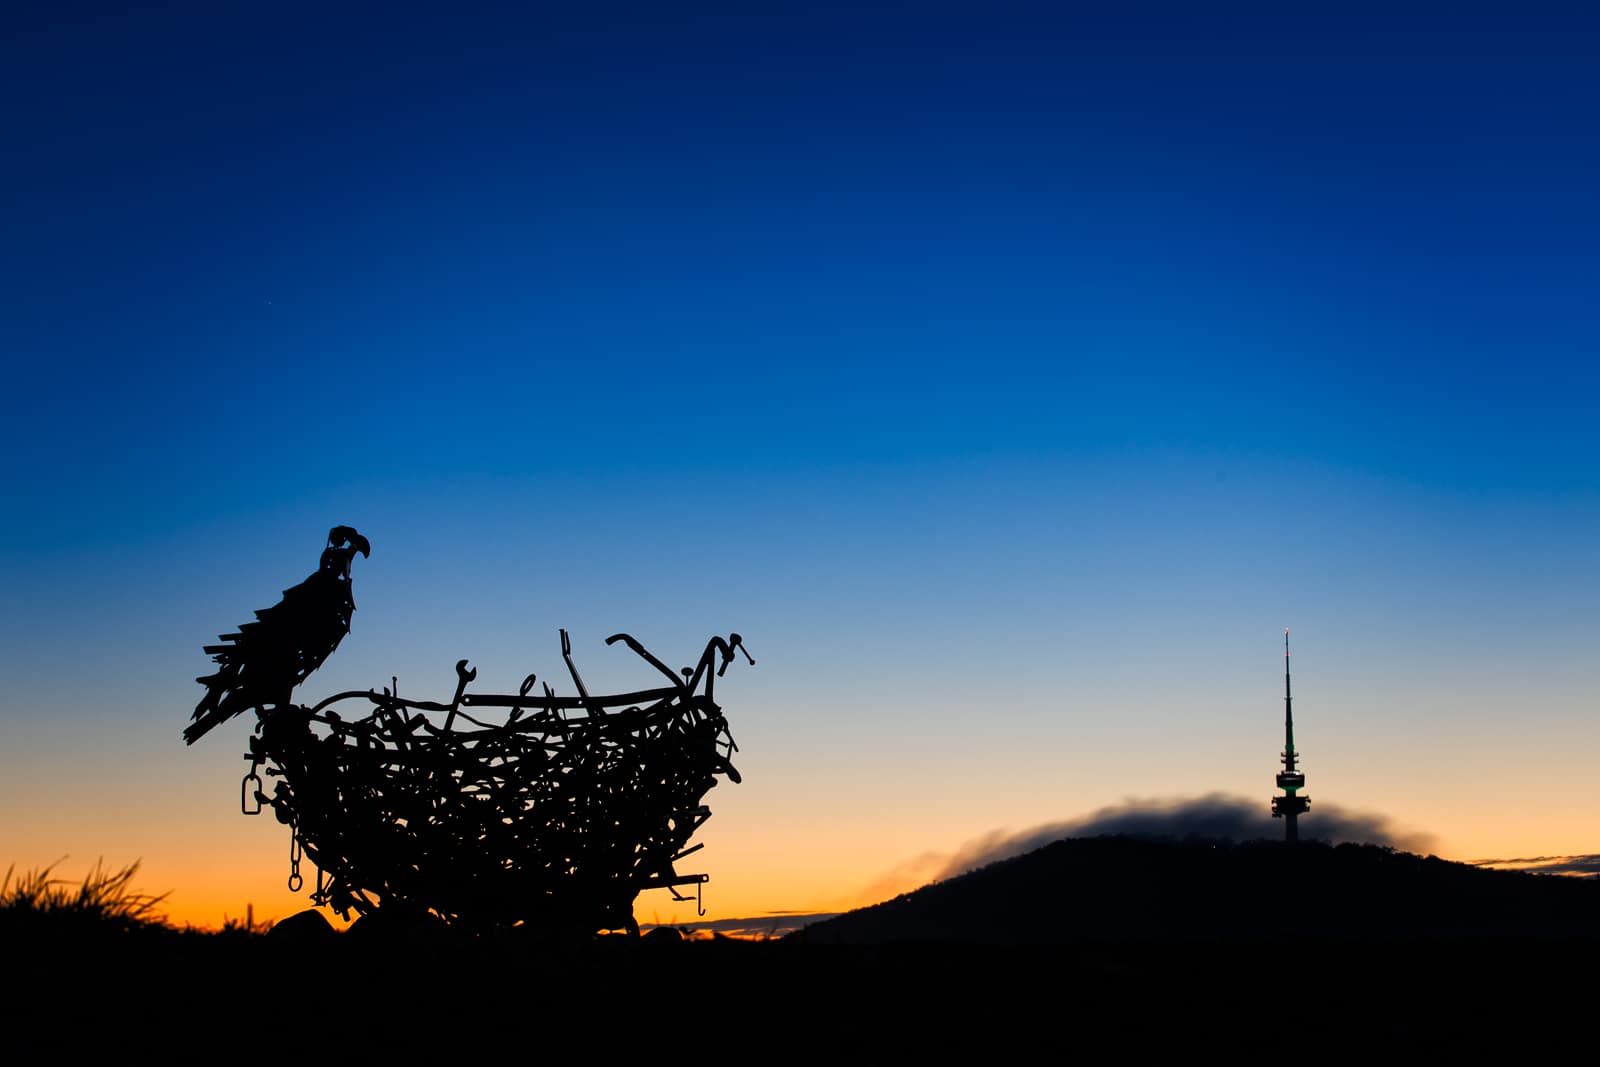 The Eagle's nest at the Canberra arboretum